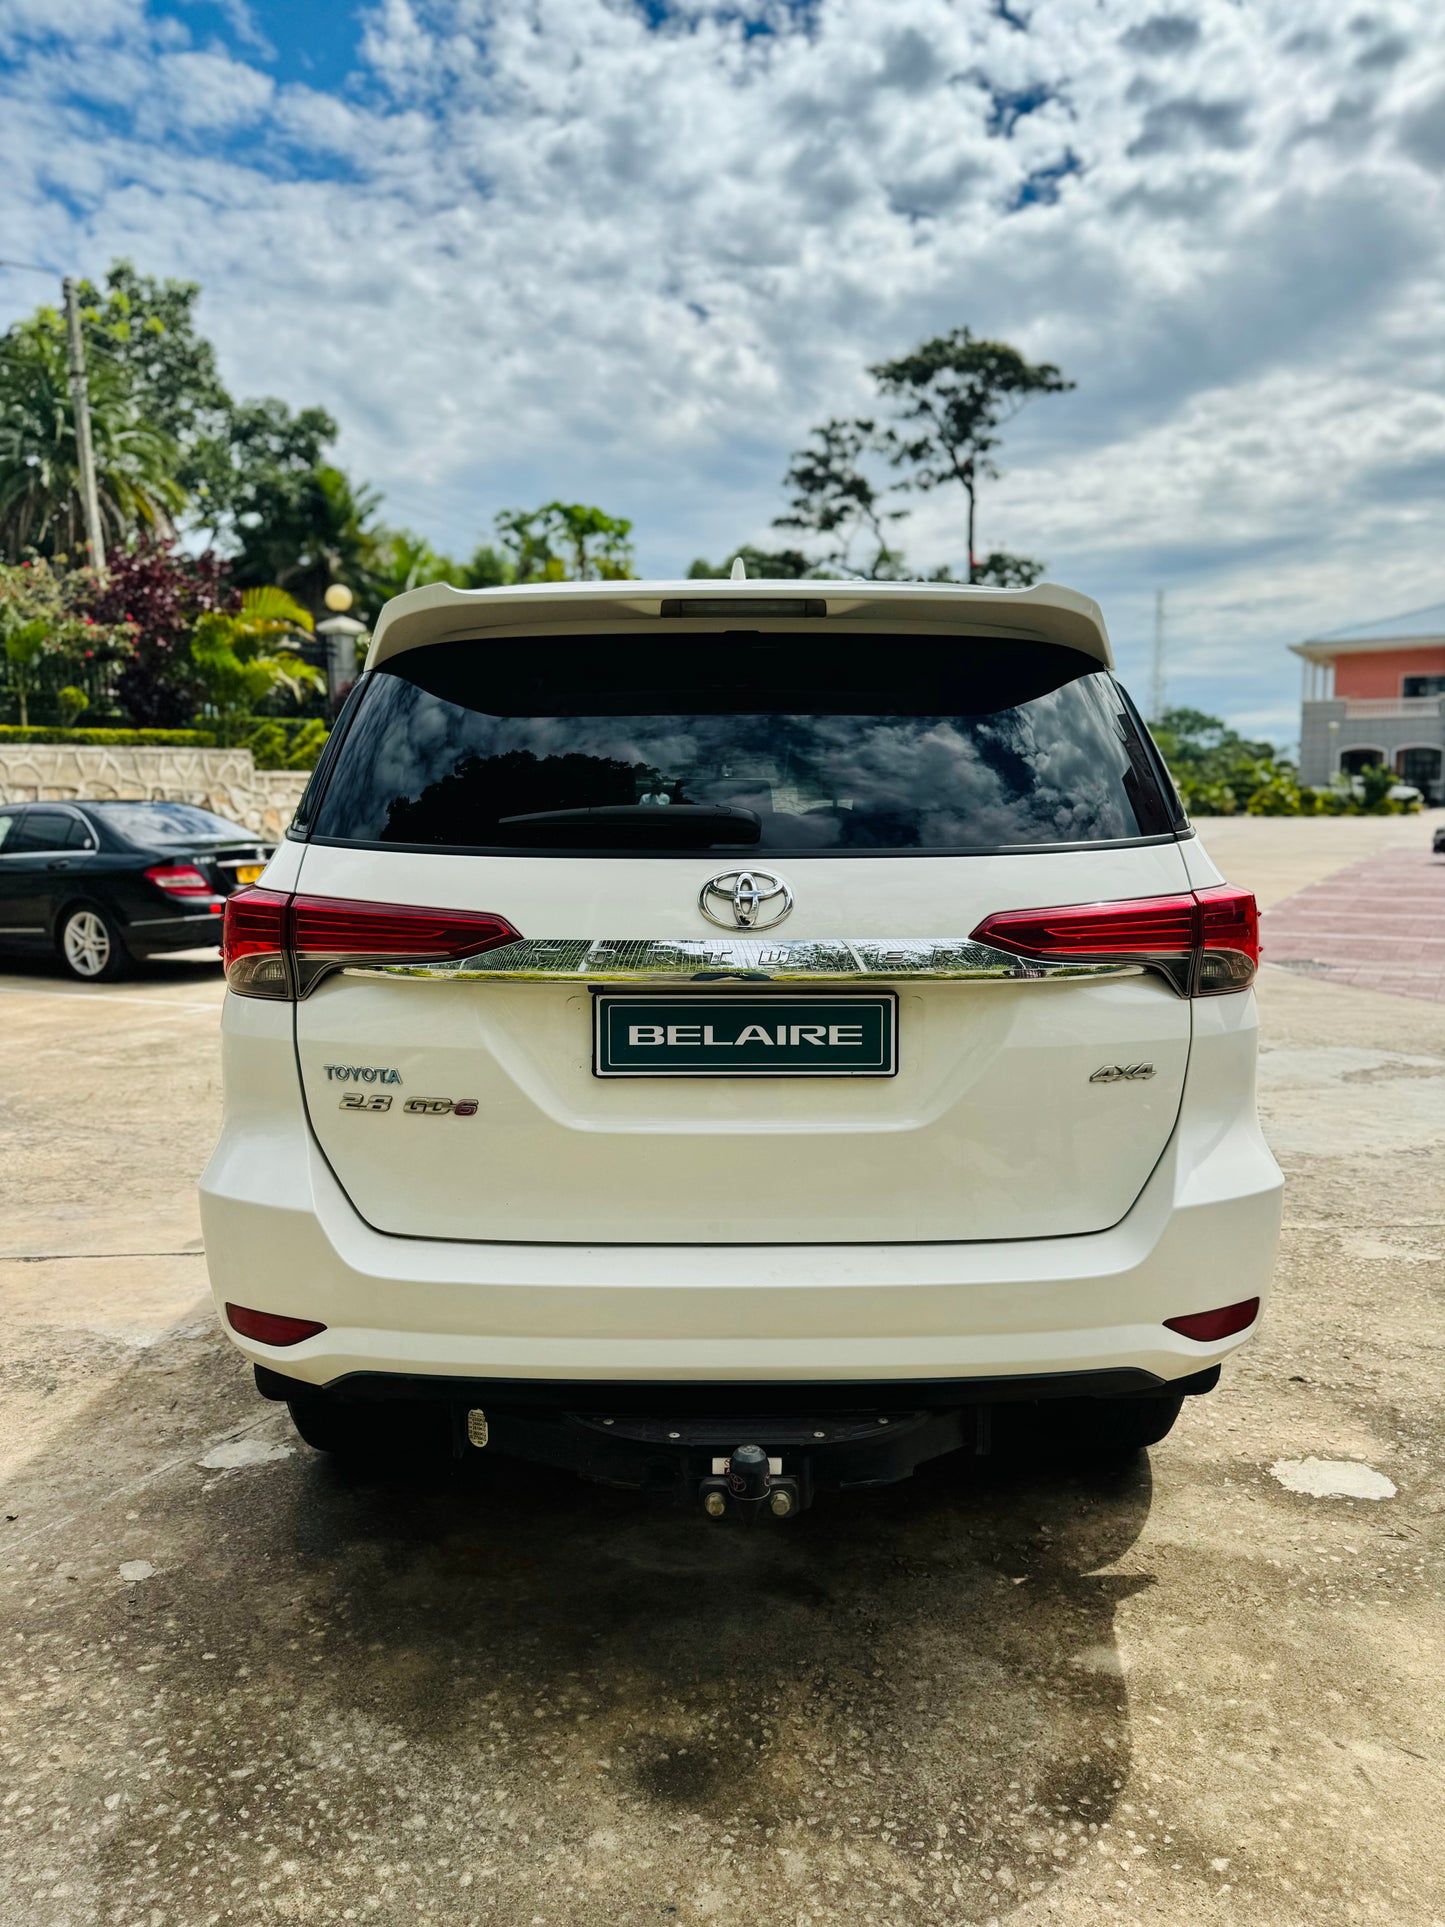 2018 Toyota Fortuner GD-6